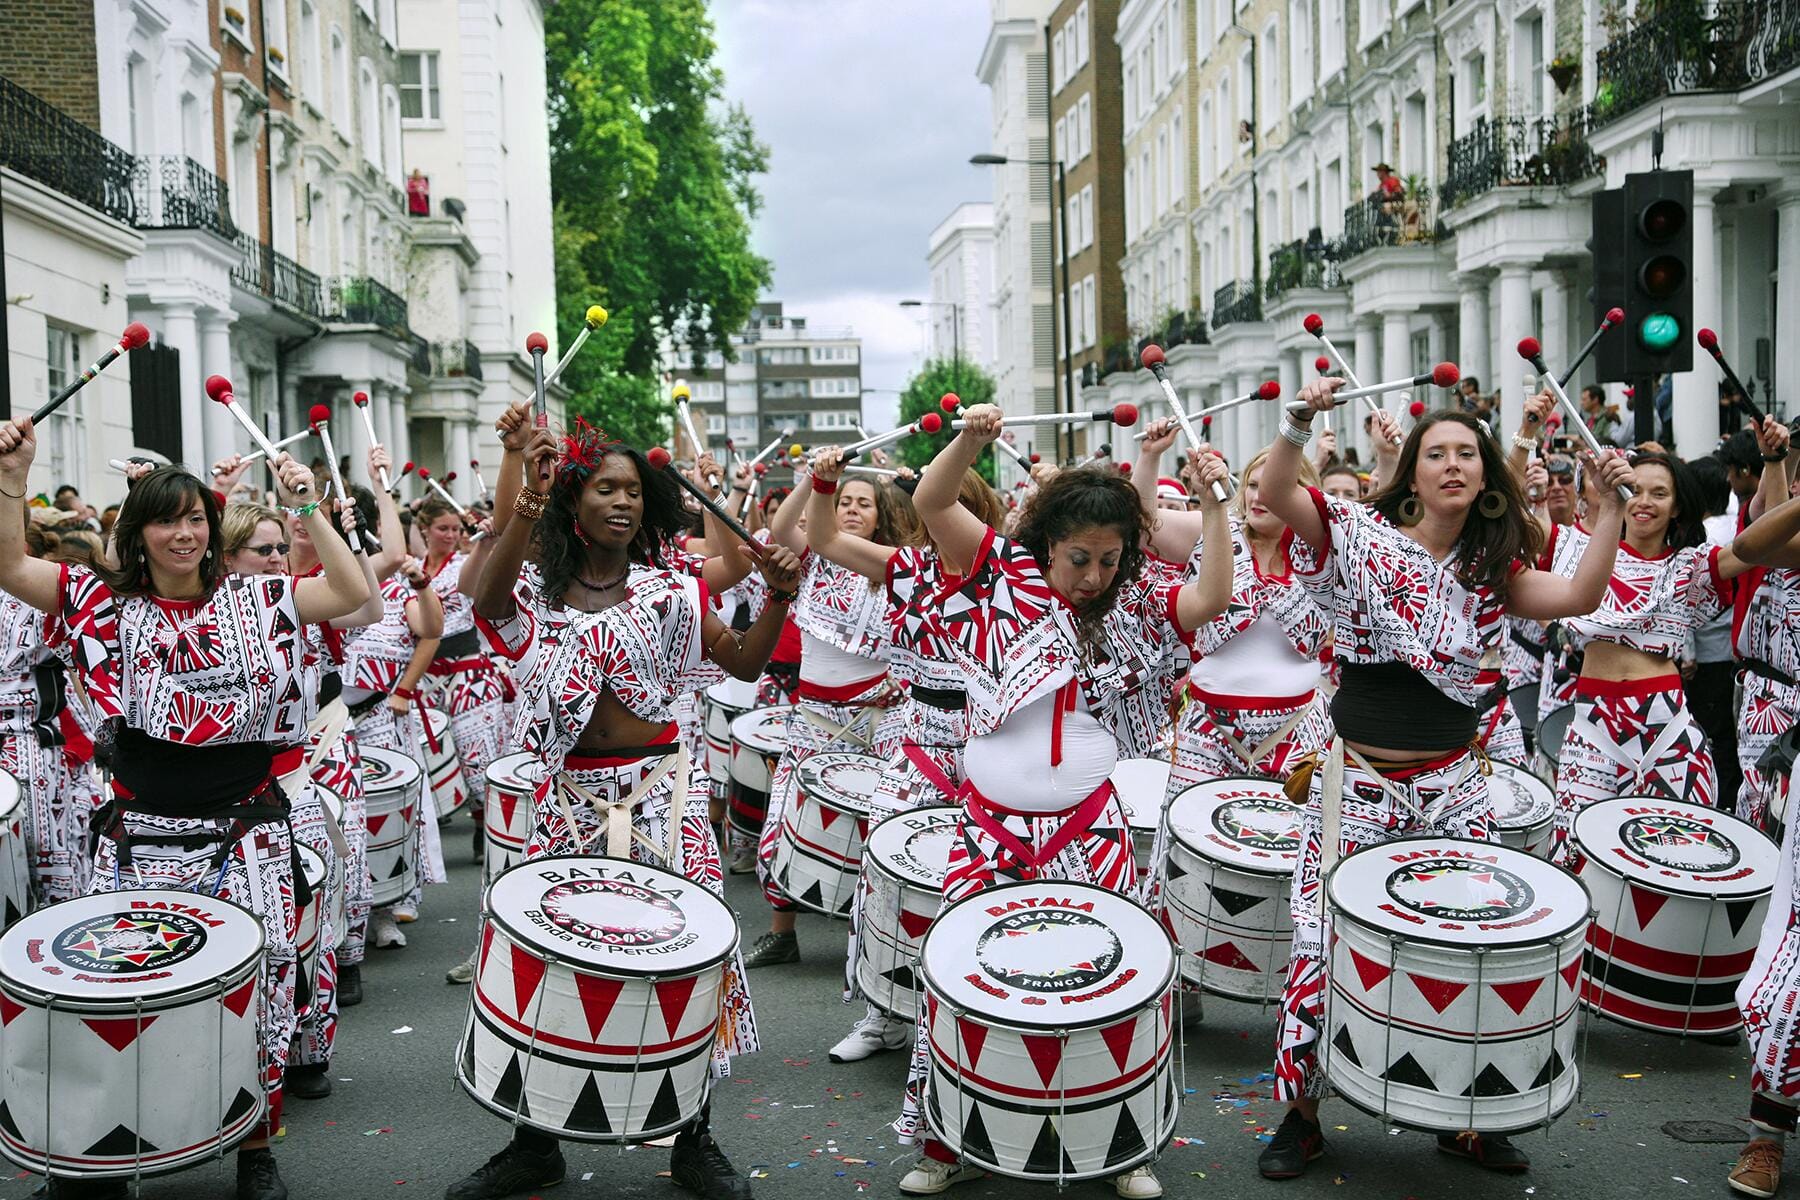 Why You Should Check out the Notting Hill Carnival in London, England